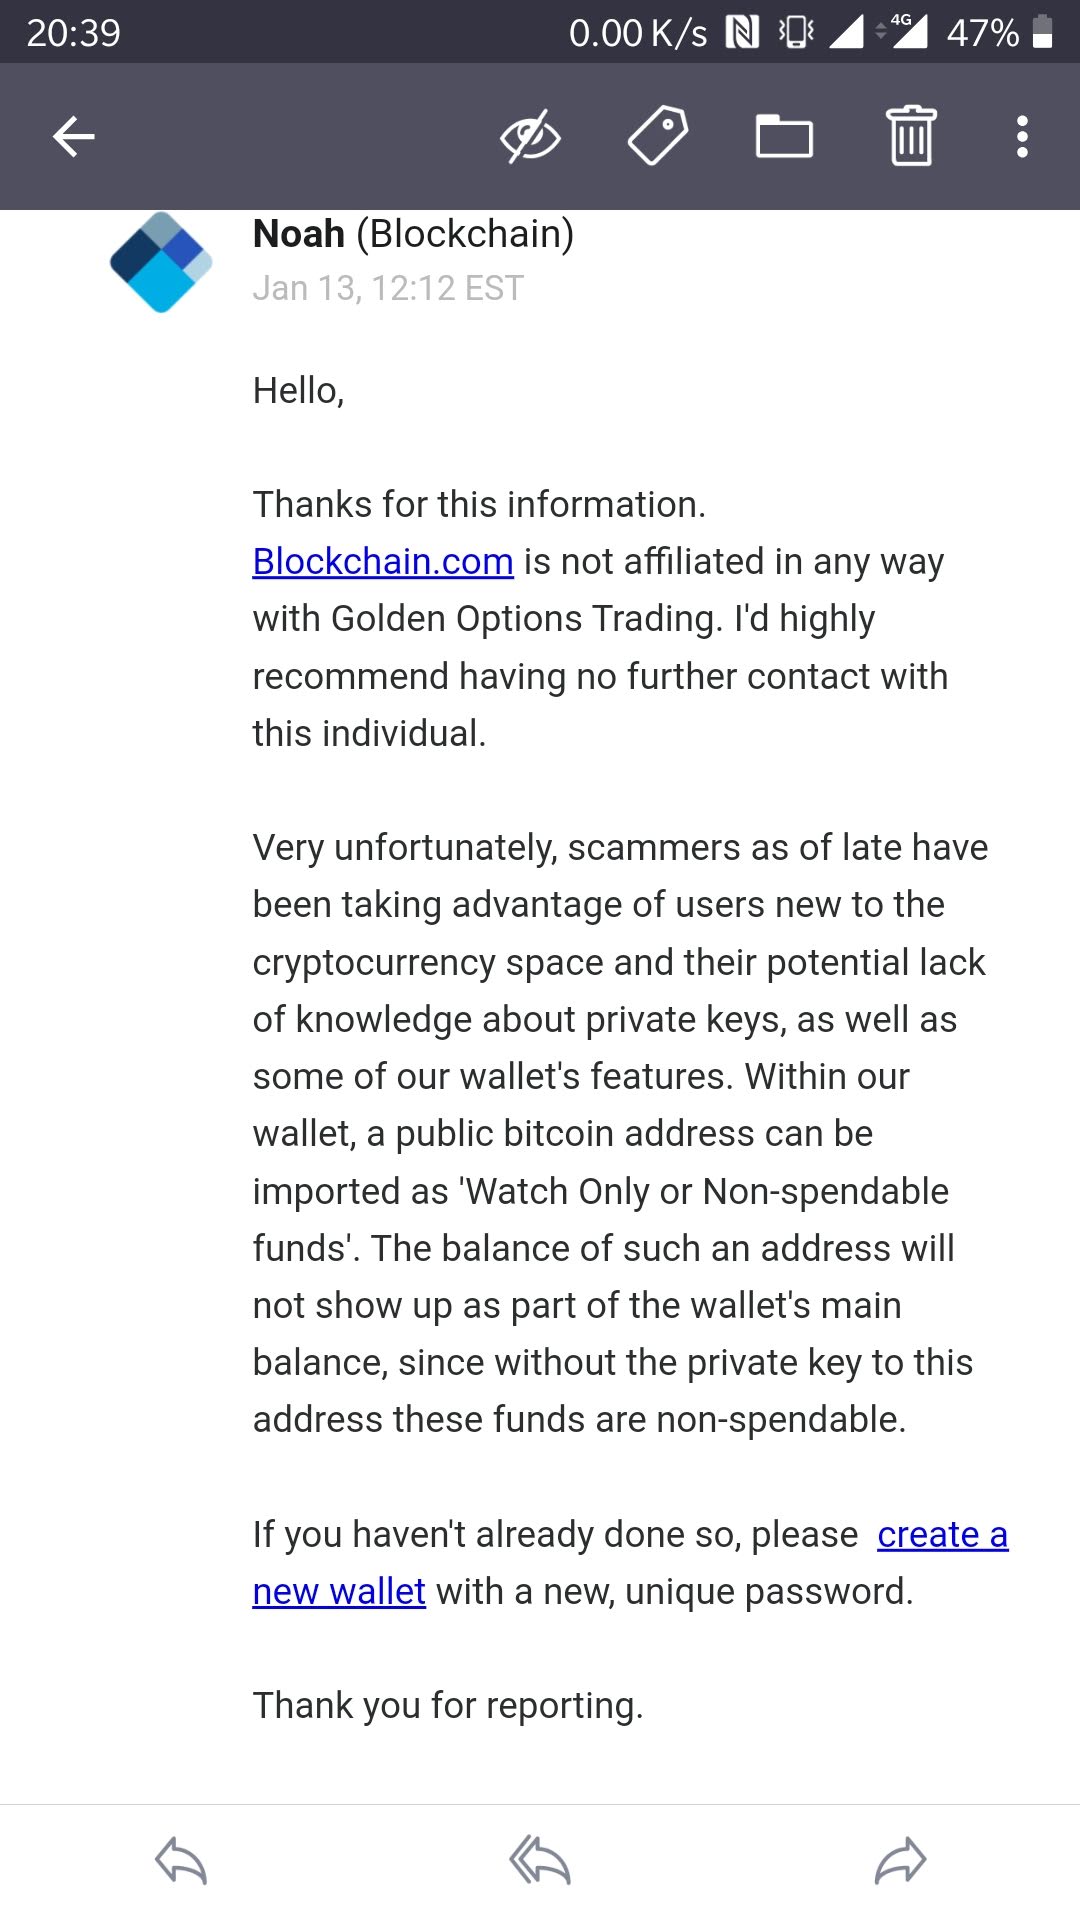 emailing with support from Golden Options Trade 